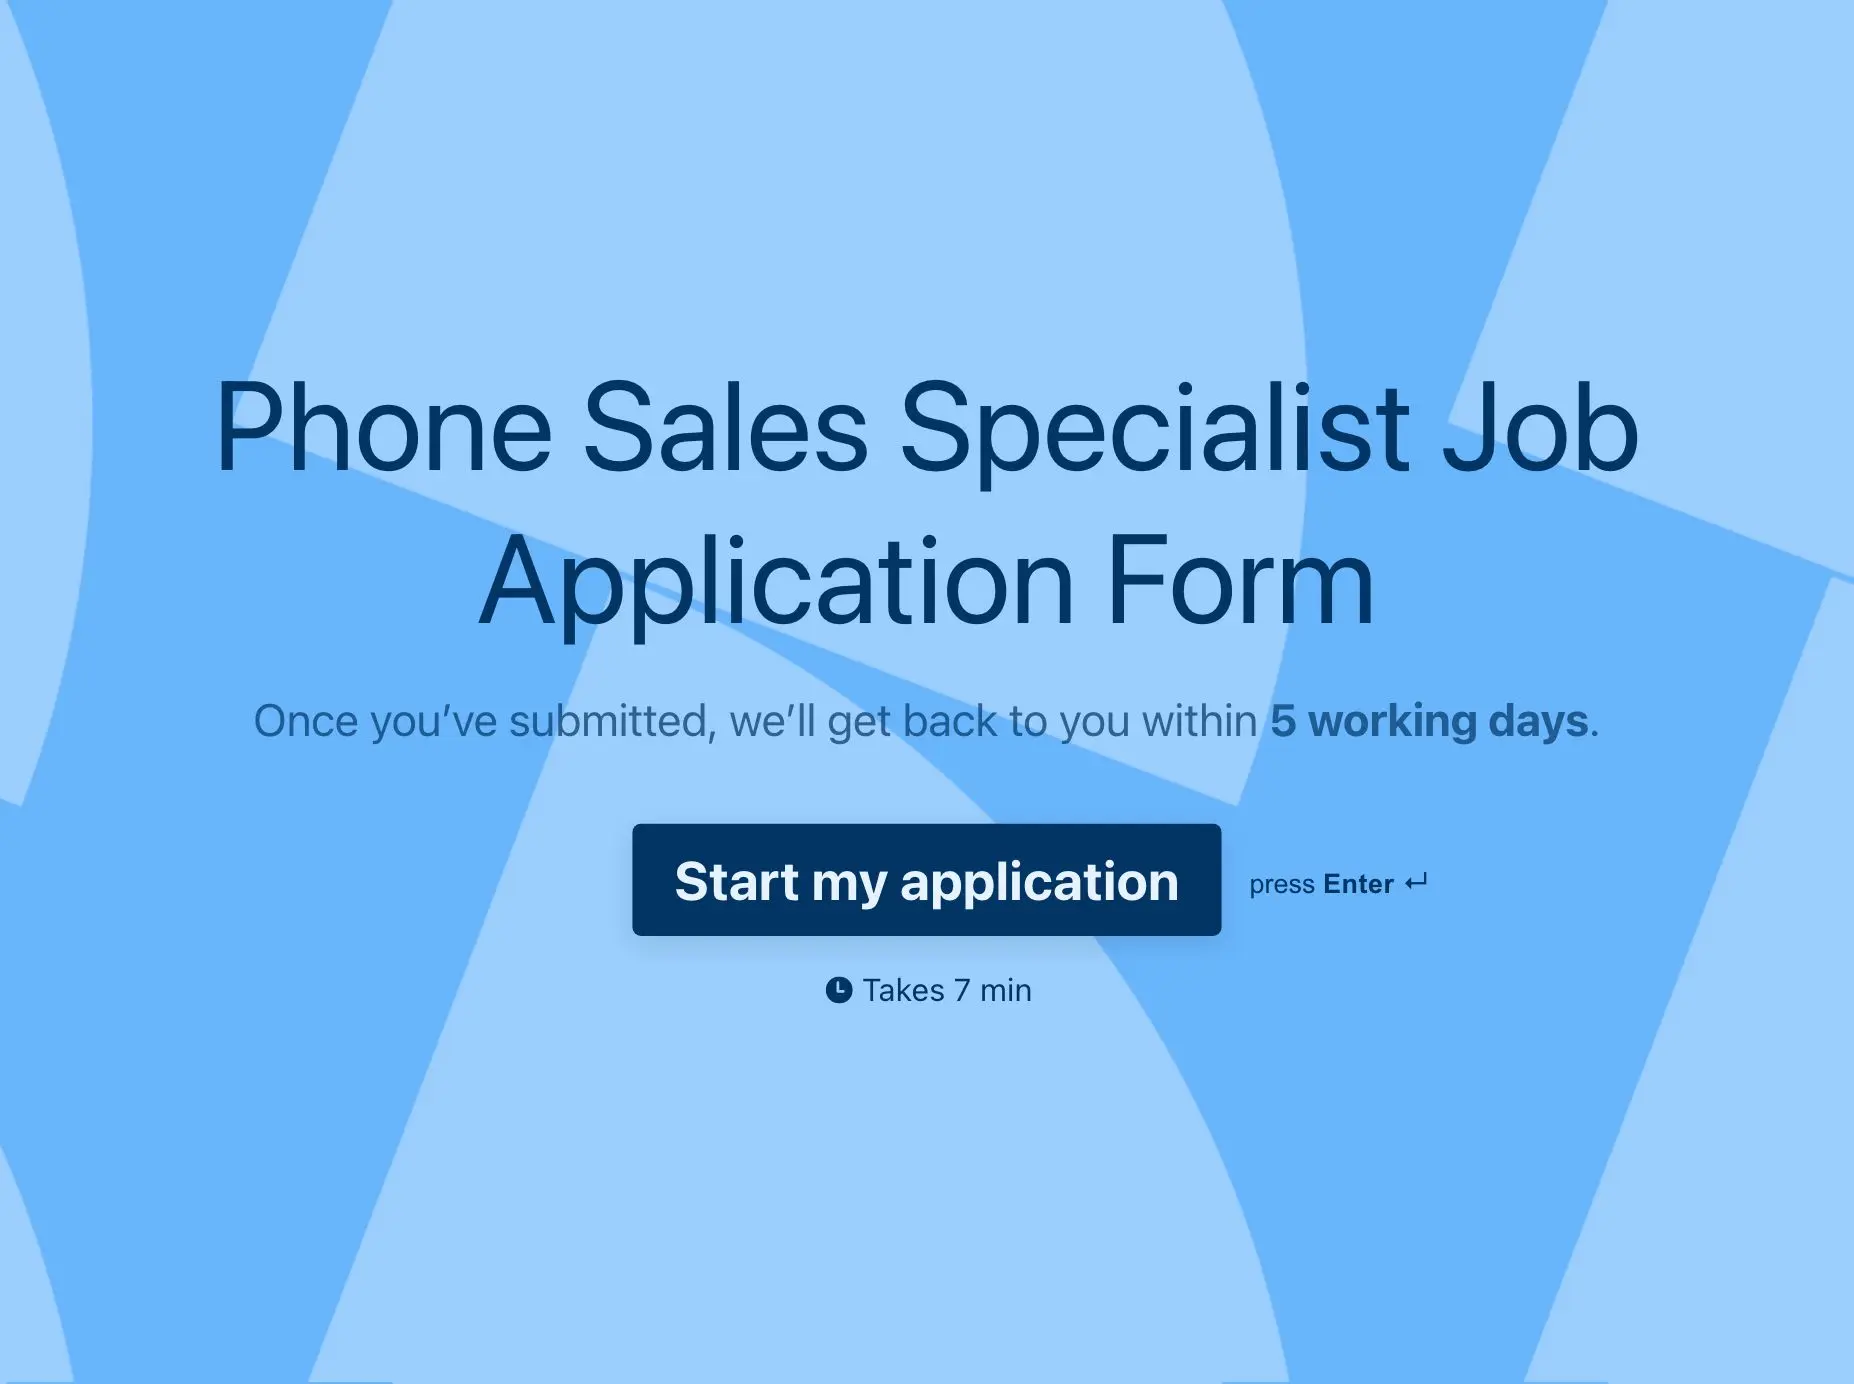 Phone Sales Specialist Job Application Form Template Hero